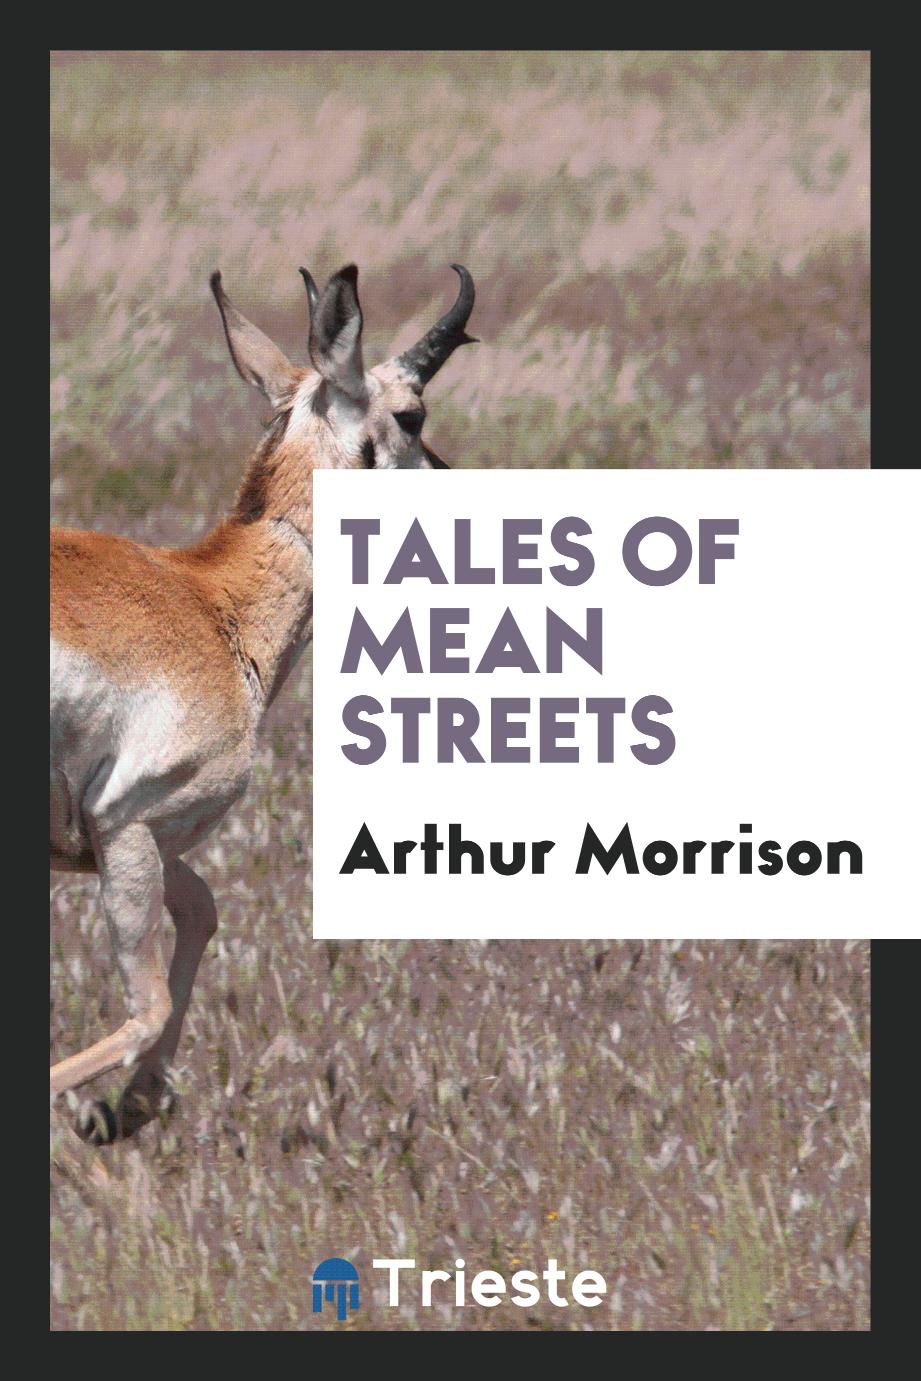 Tales of mean streets